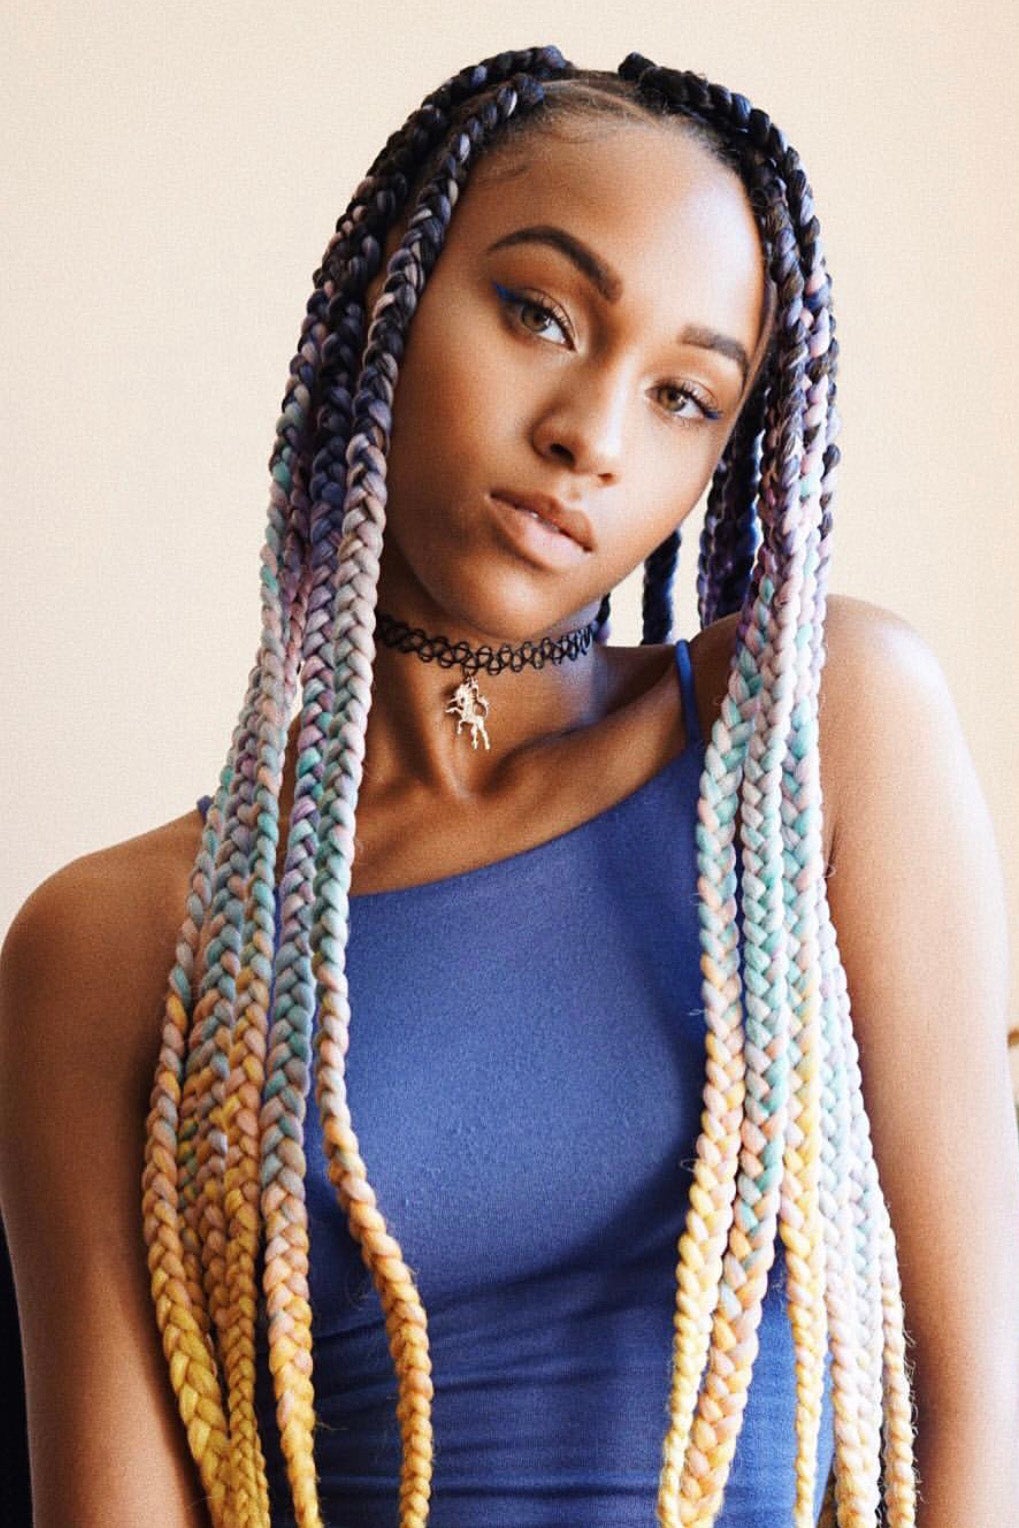 Amazing Ombre Braids Like You've Never Seen Them Before
